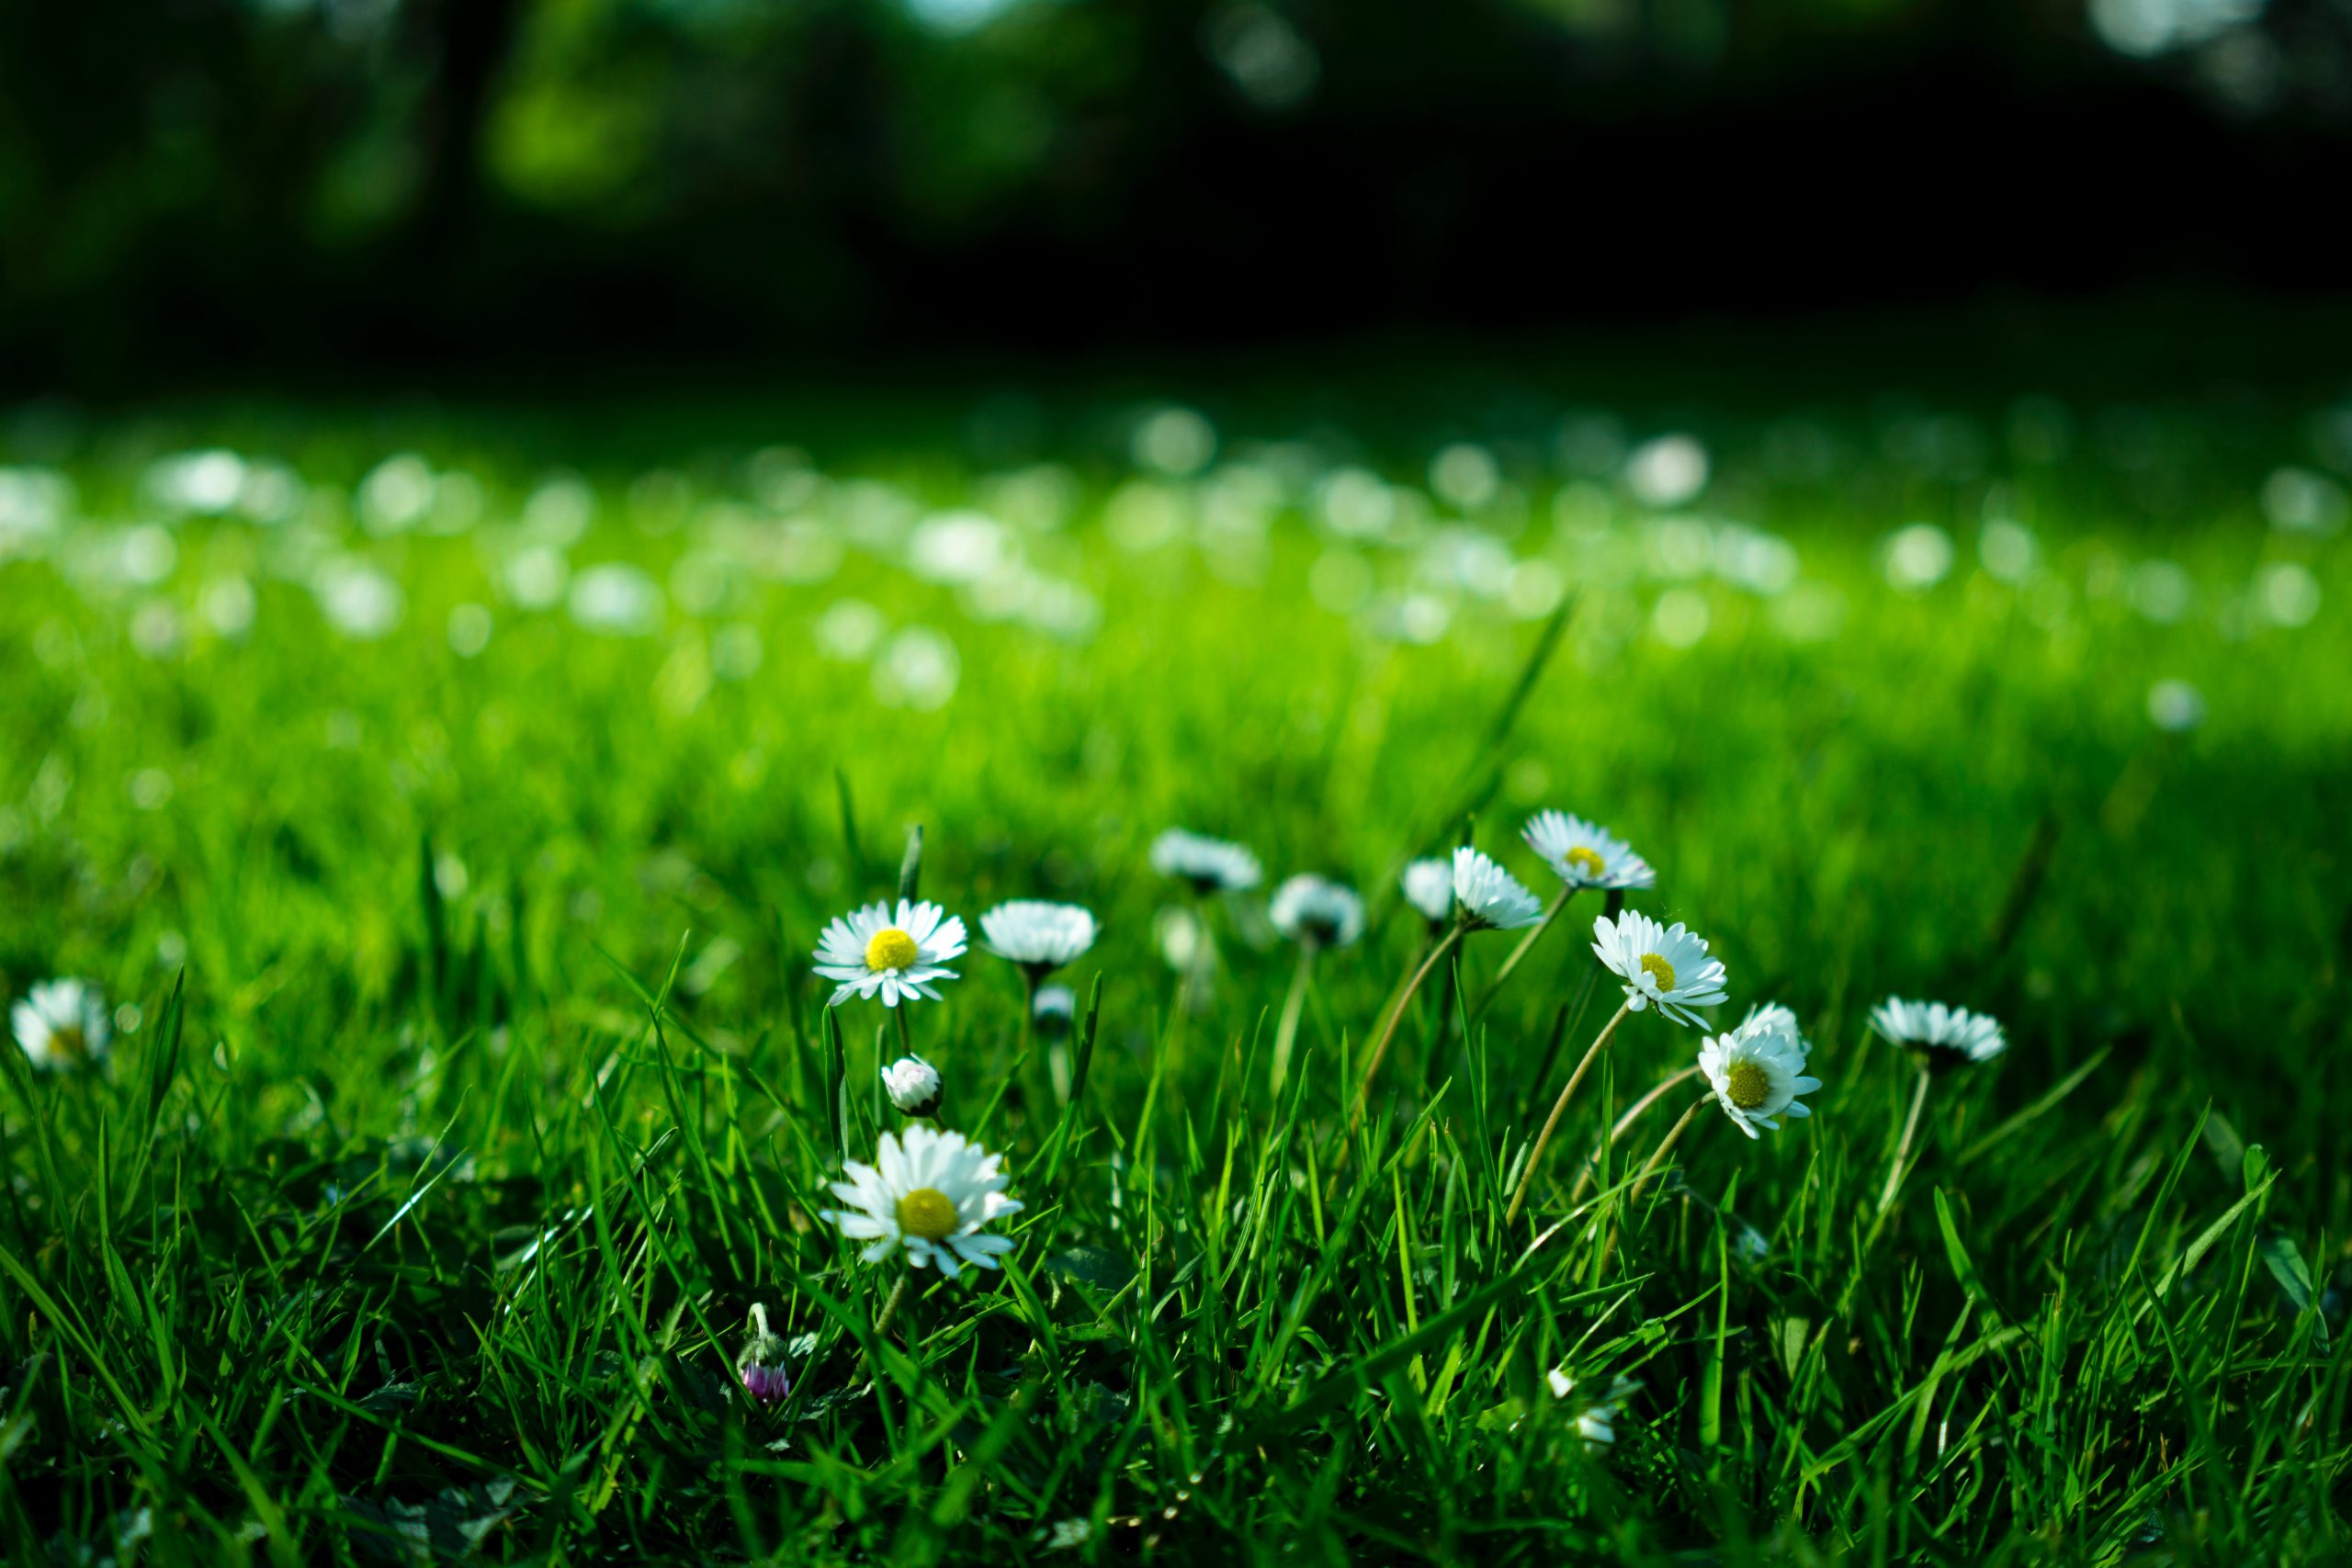 Grass and daisy flowers